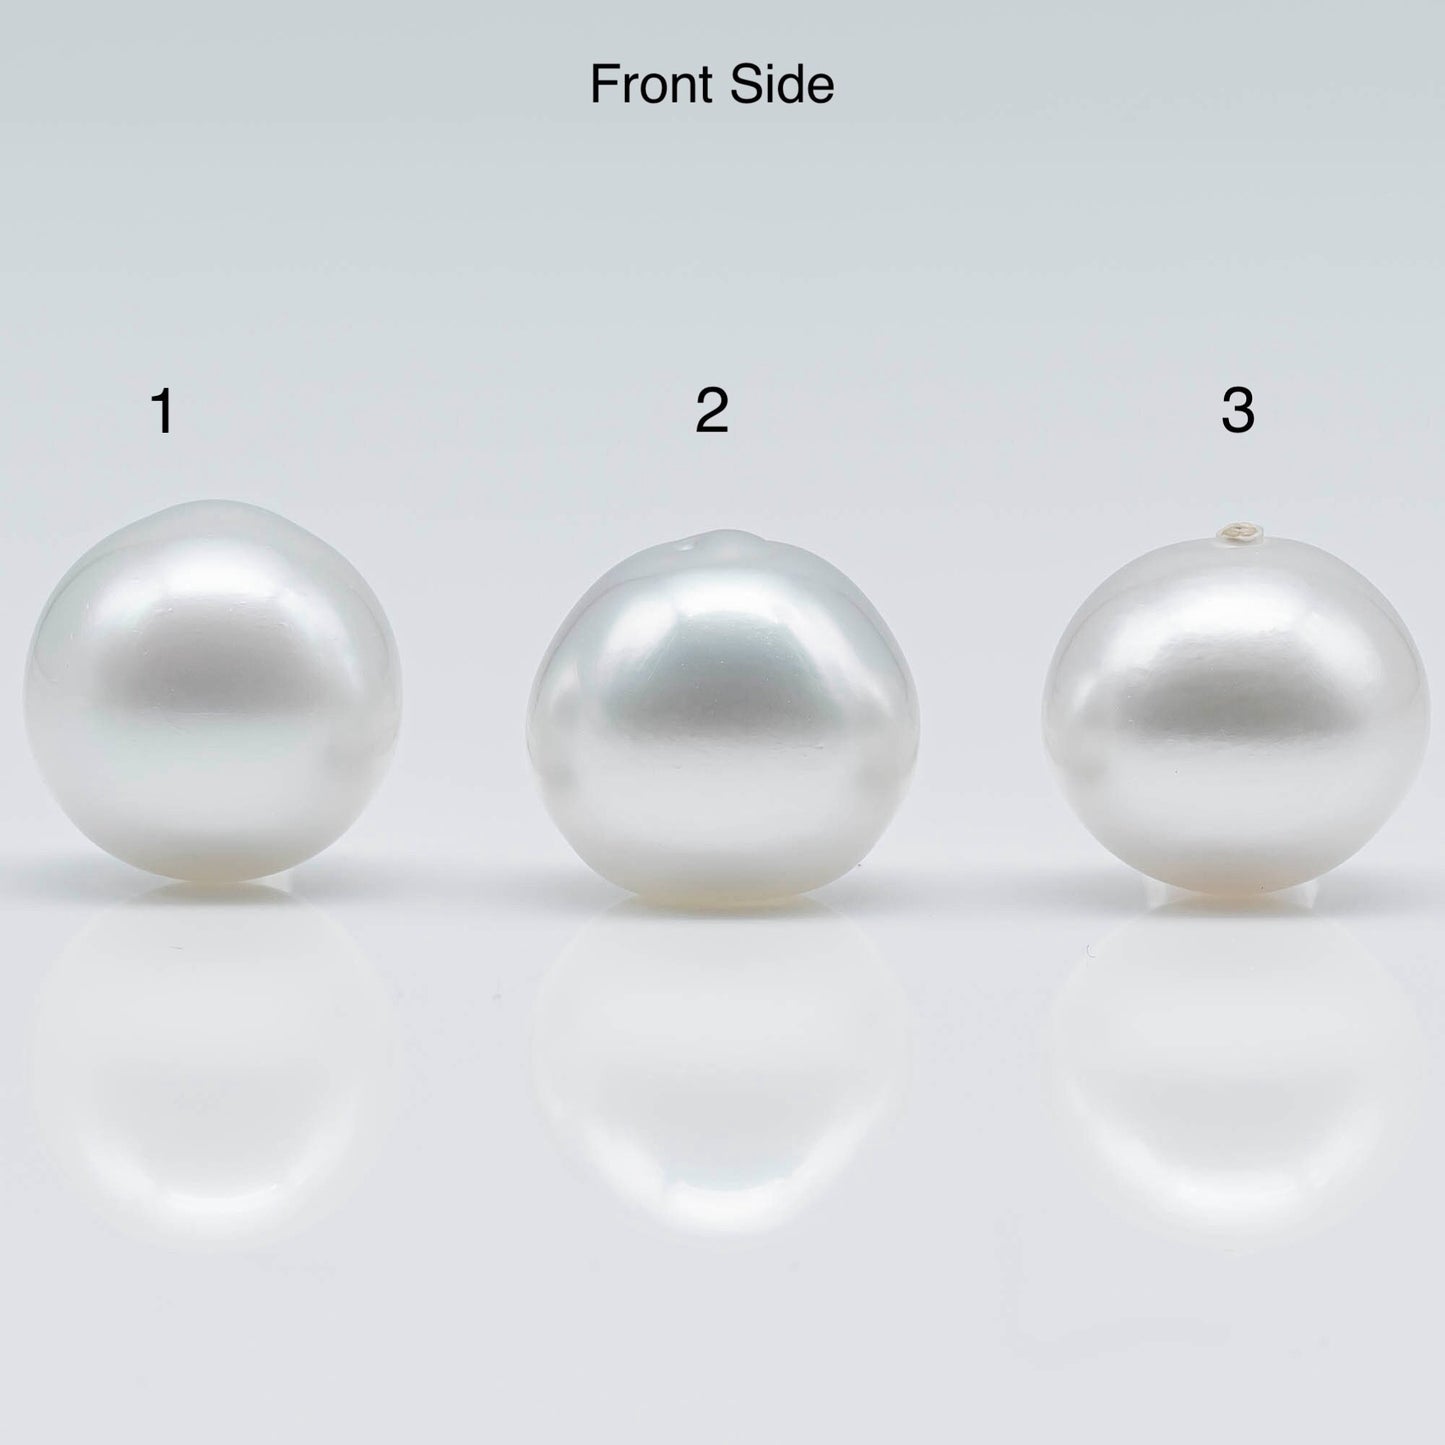 12-13mm South Sea Pearl Drops in White Natural Color with Beautiful Lusters and Minor Blemishes, Undrilled Single Piece, SKU # 1749SS